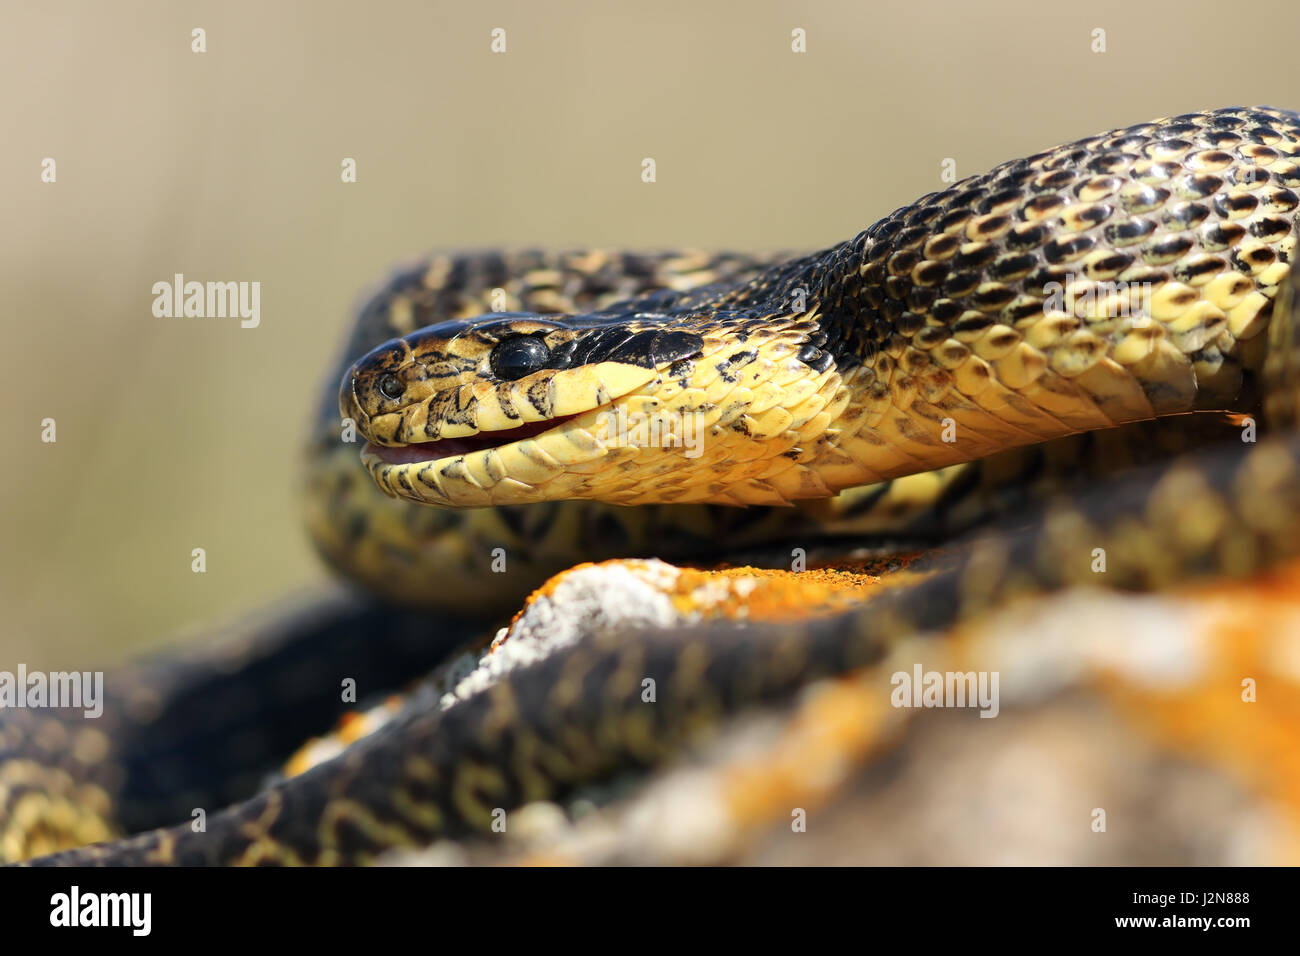 close up of blotched snake head with open mouth ( Elaphe sauromates ) Stock Photo